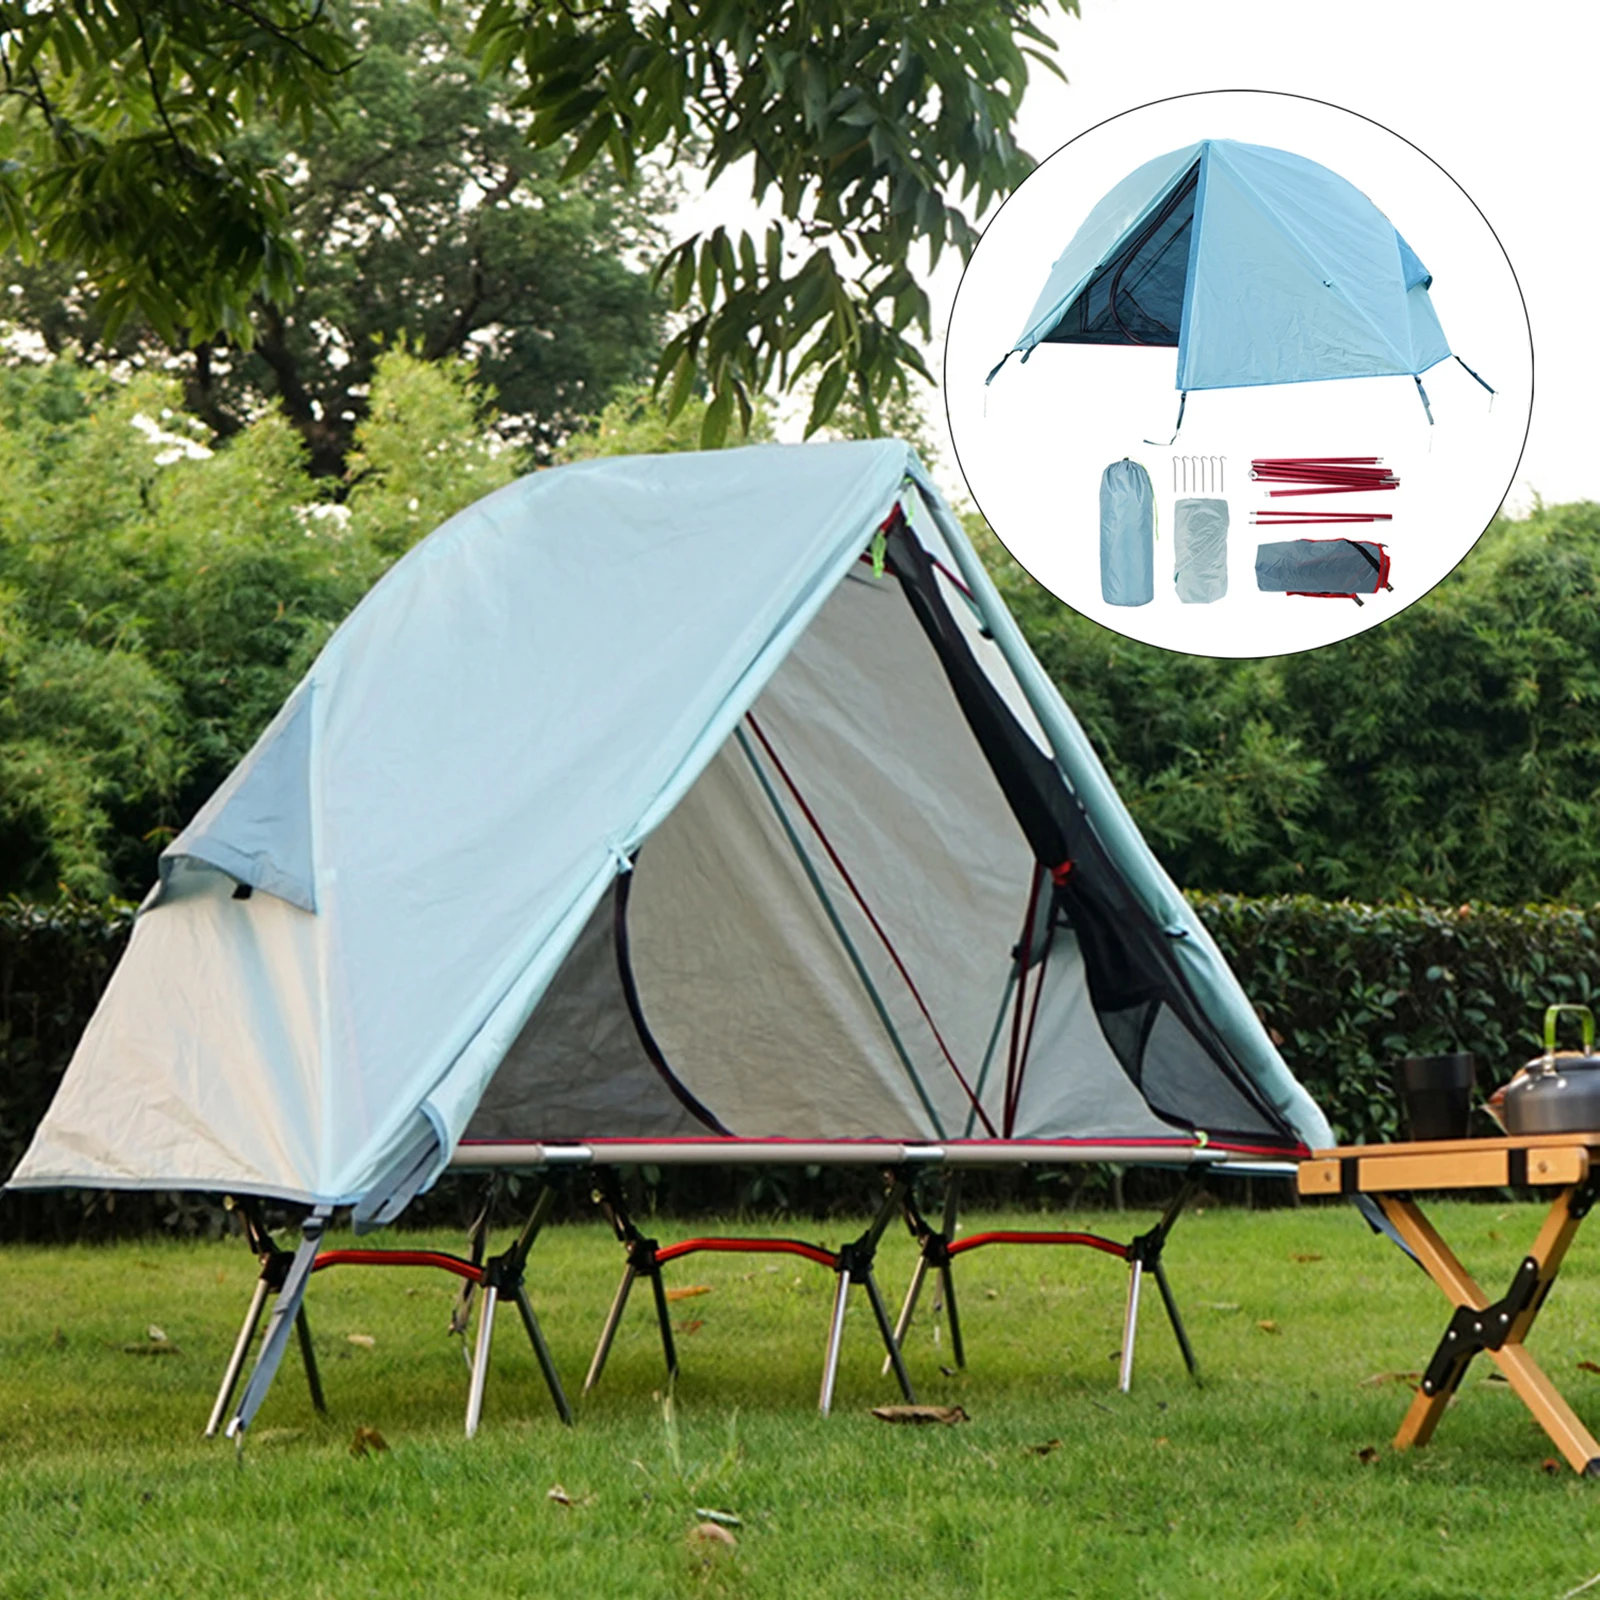 Camping Tent Easy Set up Waterproof Windproof Aluminum Rod One Person Lightweight Tent for Picnic Climbing Fishing Outdoor